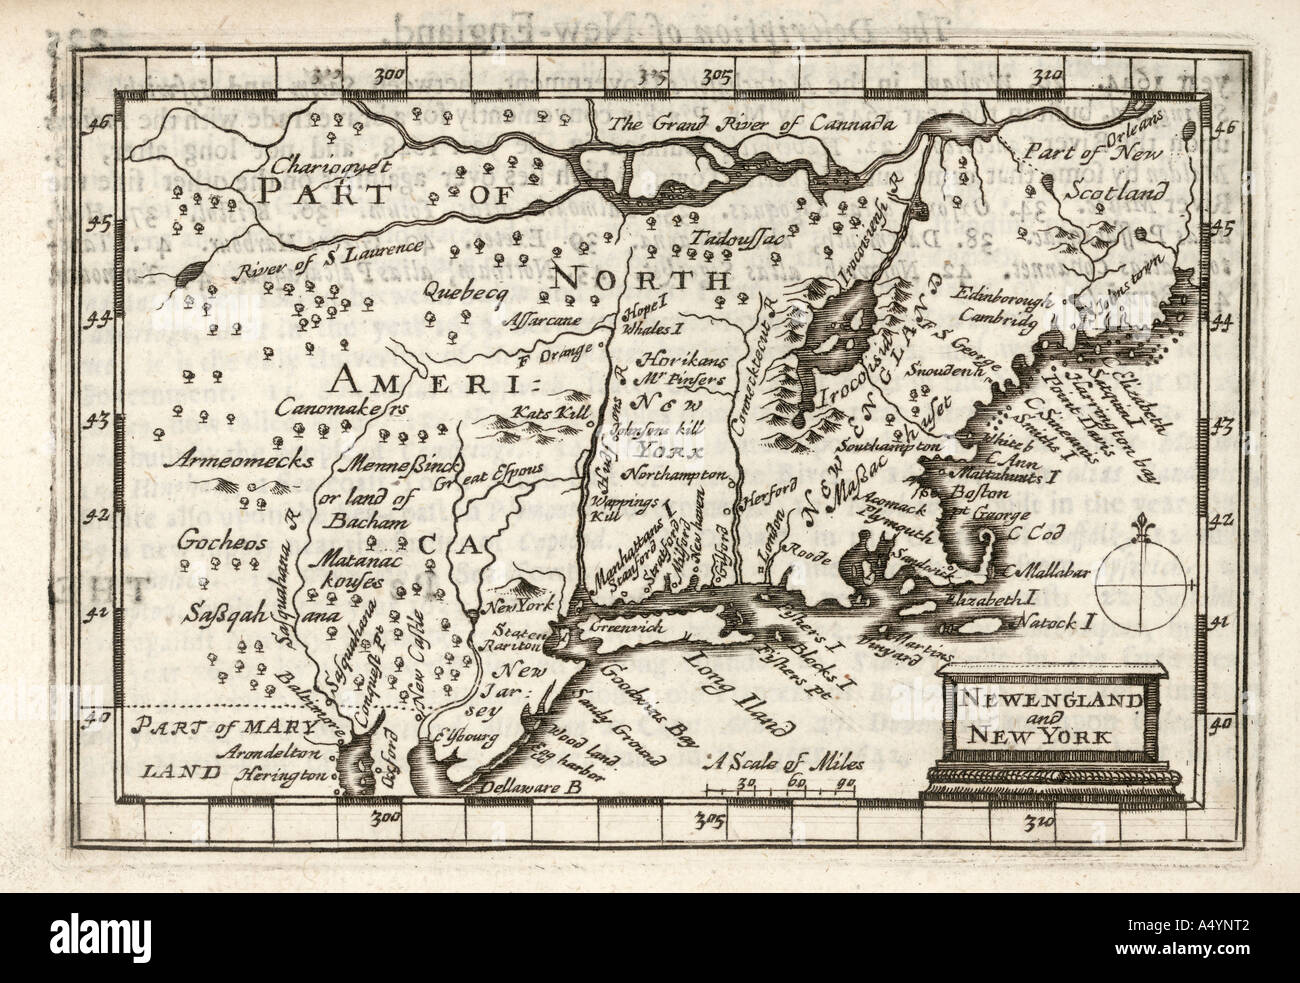 Antique map New England and New York by Petrus Kaerius 1646 from John Speed Prospect most Famous Parts of World 1675 JMH0977 Stock Photo